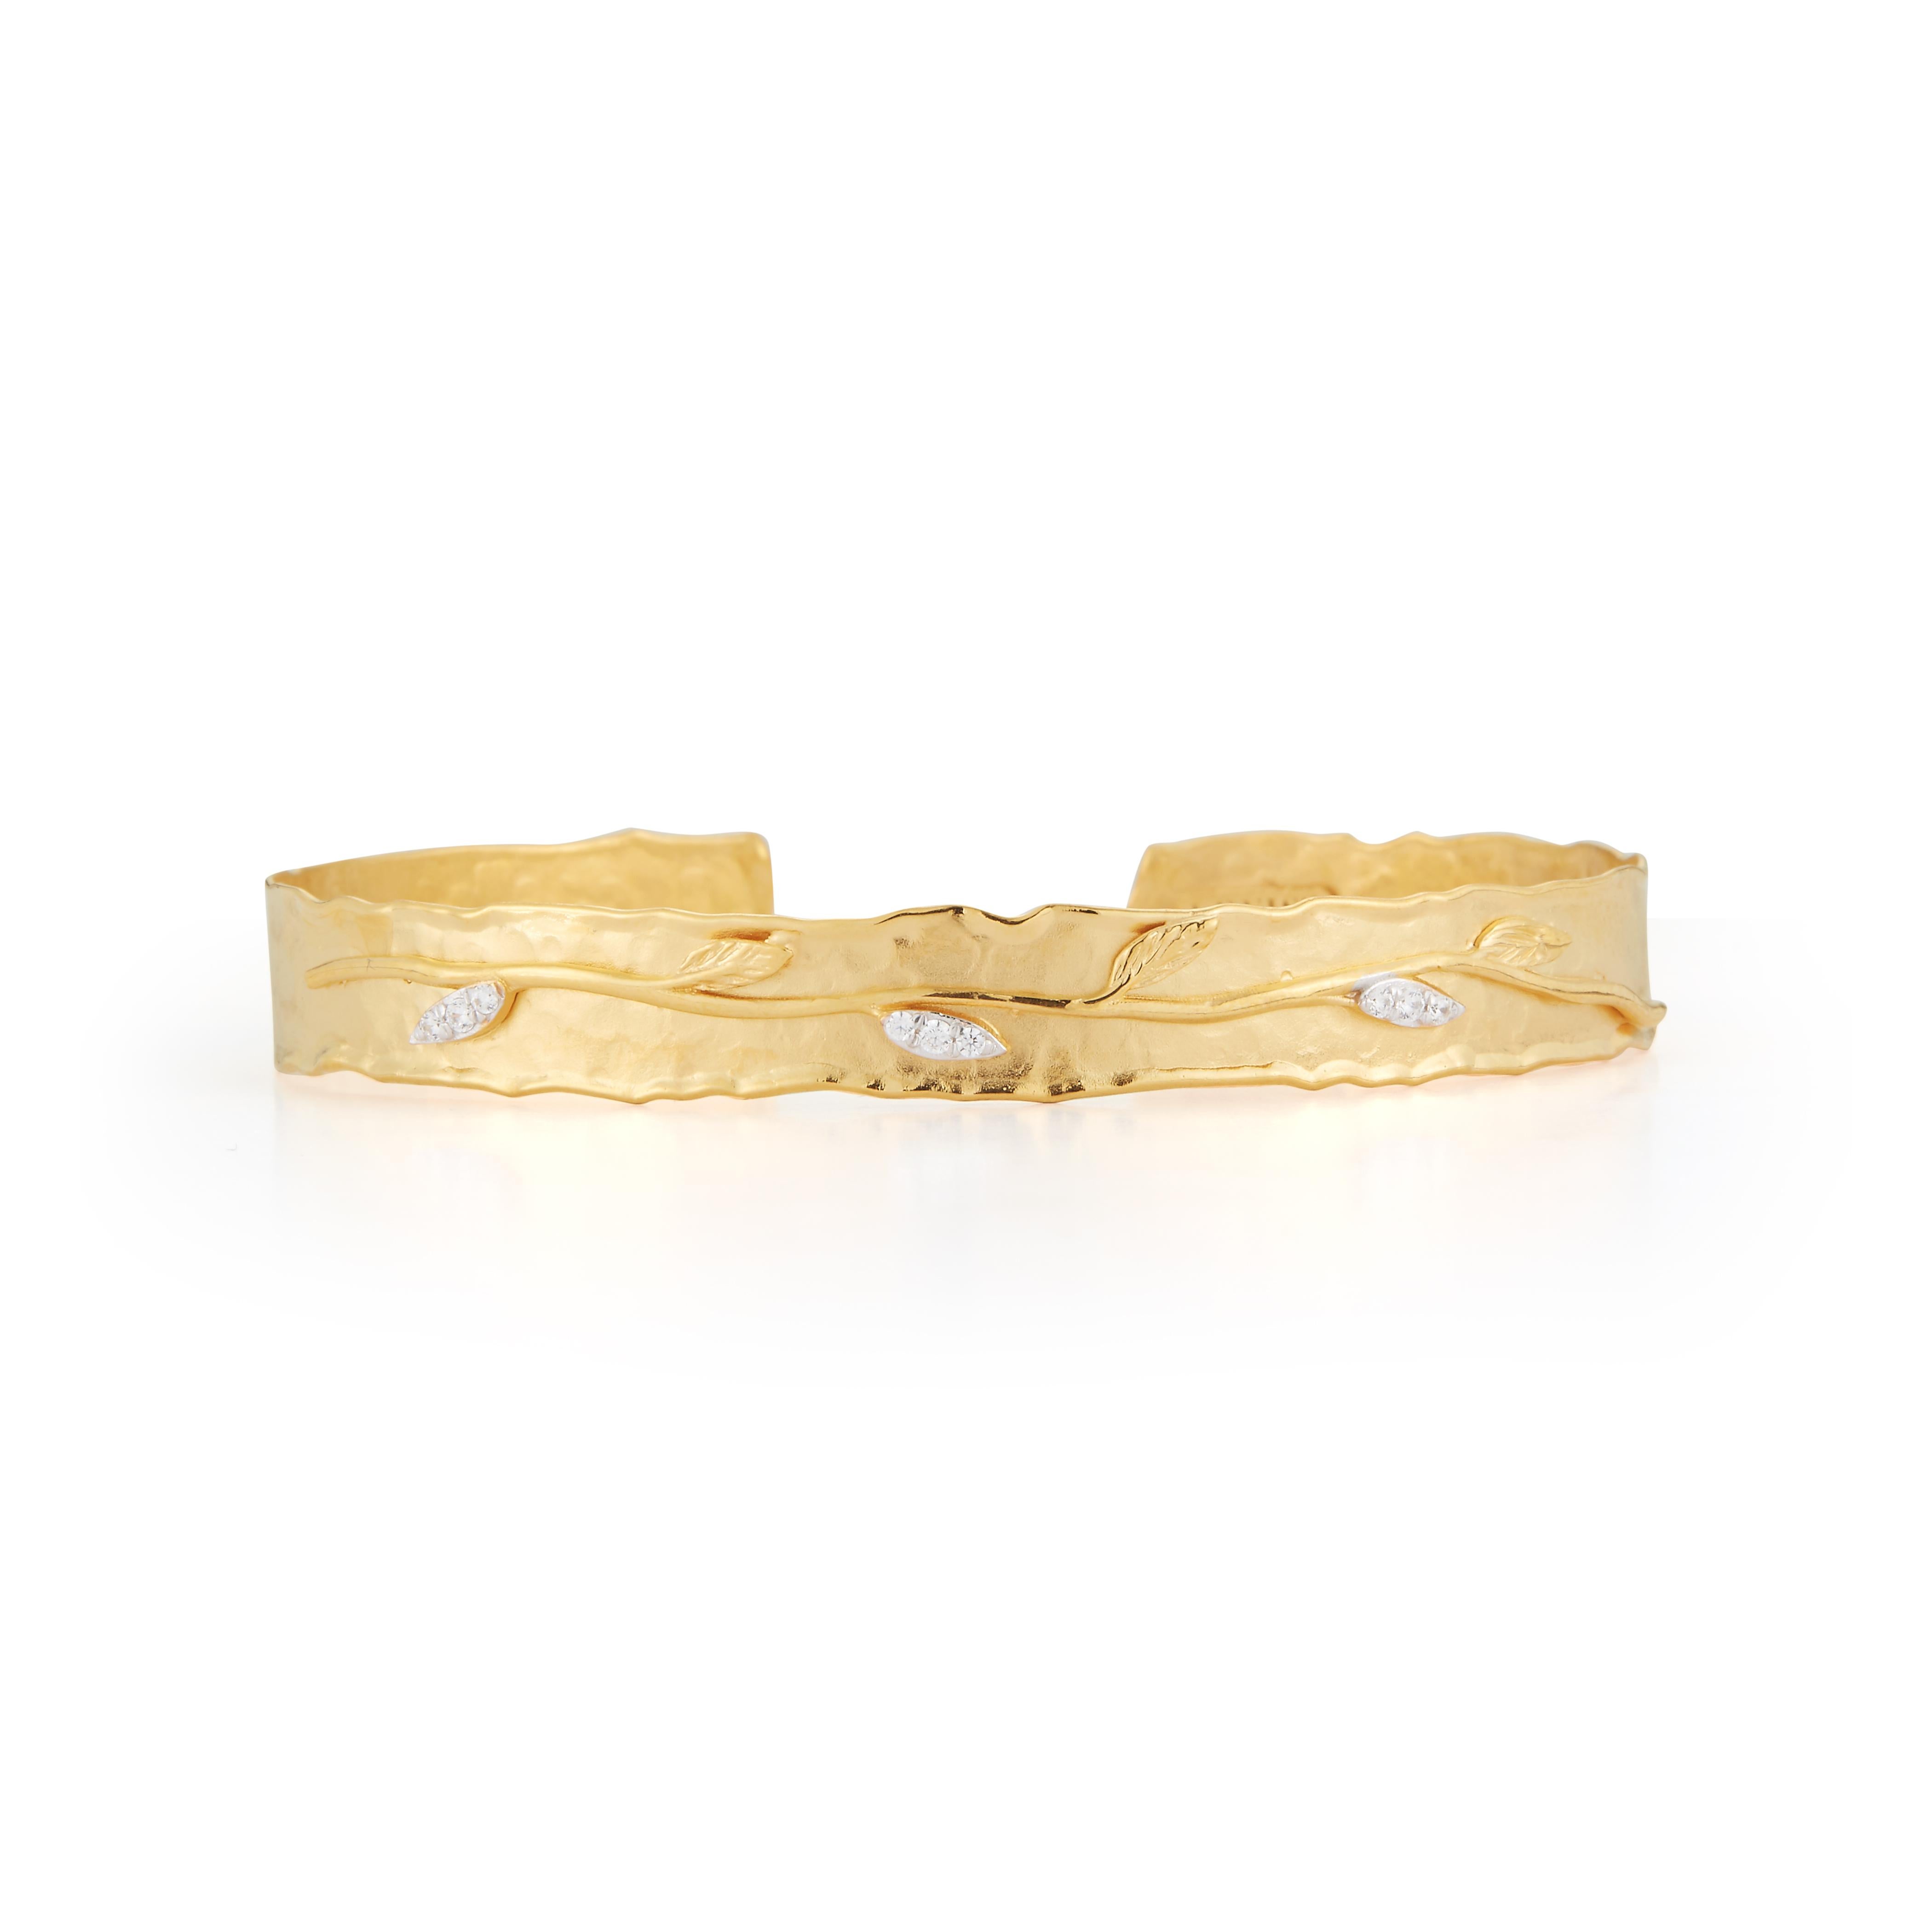 14 Karat Yellow Gold Hand-Crafted Matte and Hammer-Finished Scallop-Edged Vine Leaf Cuff Bangle Bracelet, Enhanced with 0.07 Carats of Pave Set Diamond Leaves.
